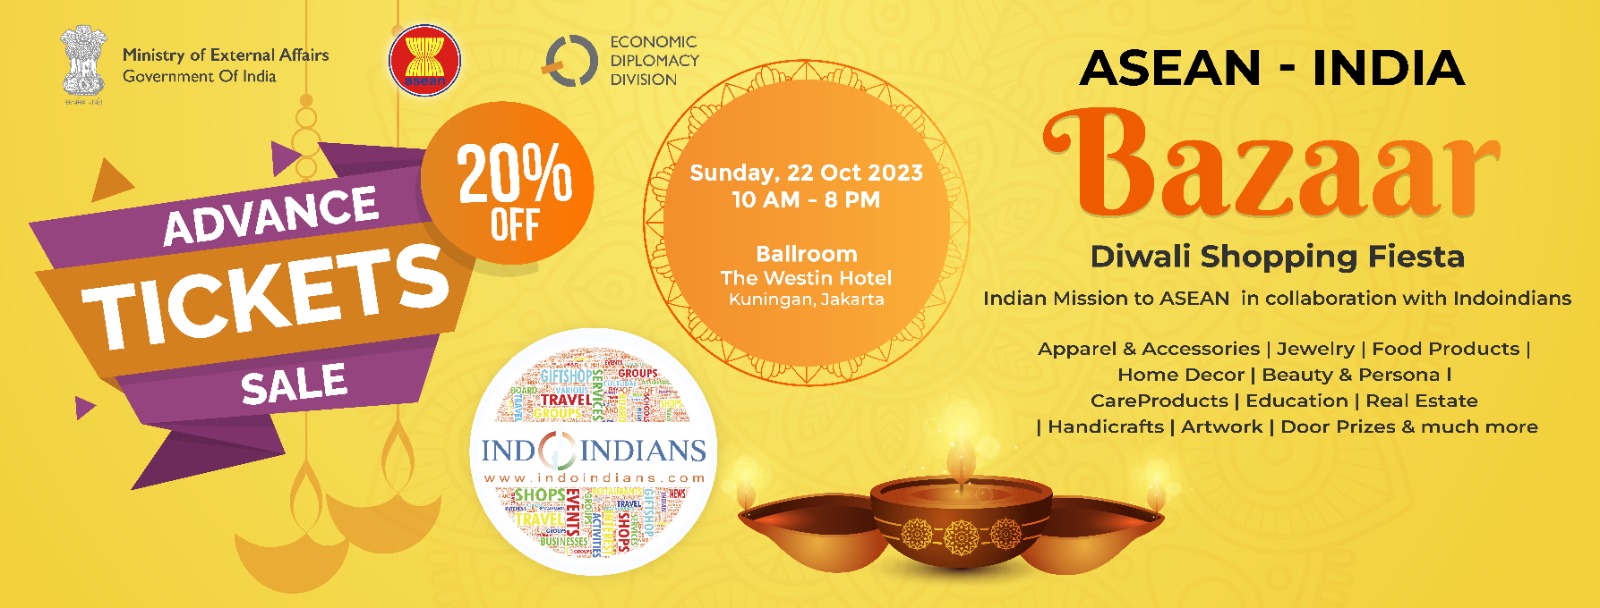 Advance Tickets For The ASEAN – India Diwali Bazaar Special Promo - 20% off